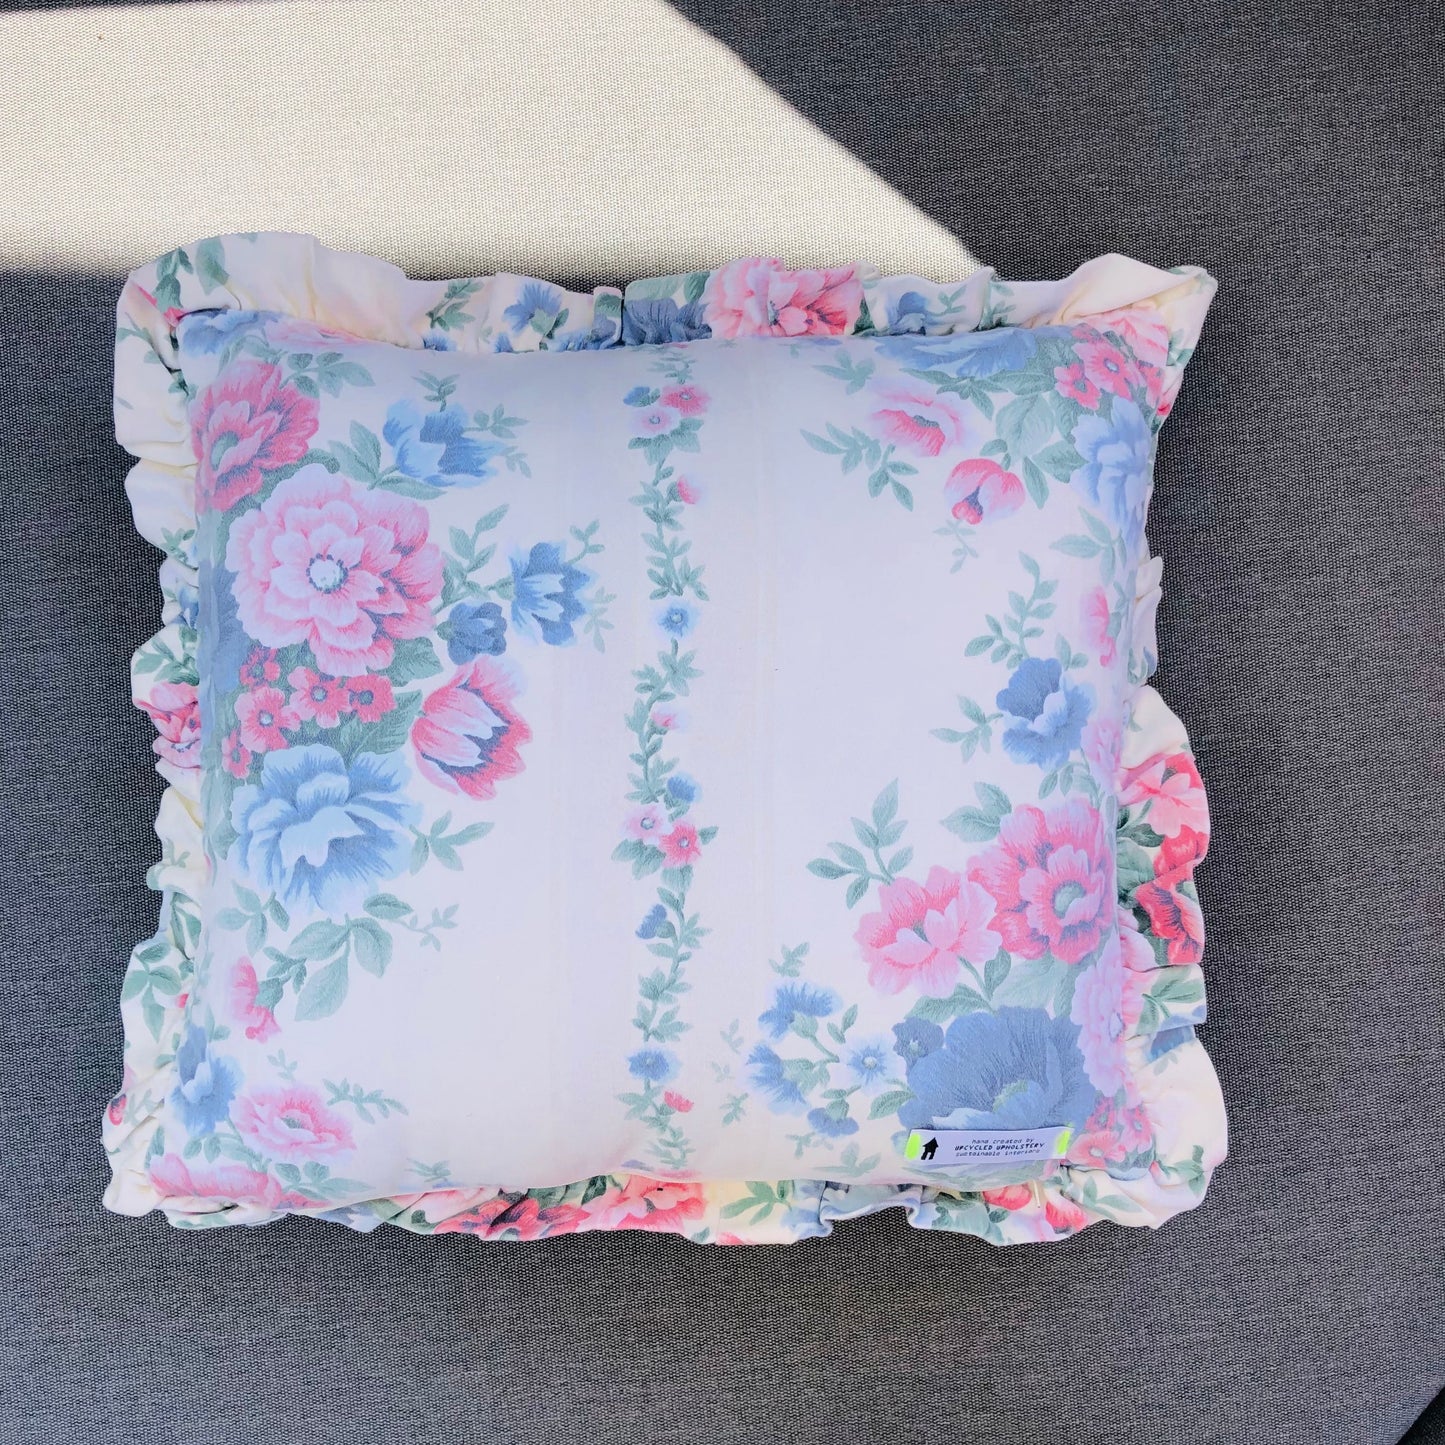 Upcycled Vintage Floral Frill Cushion